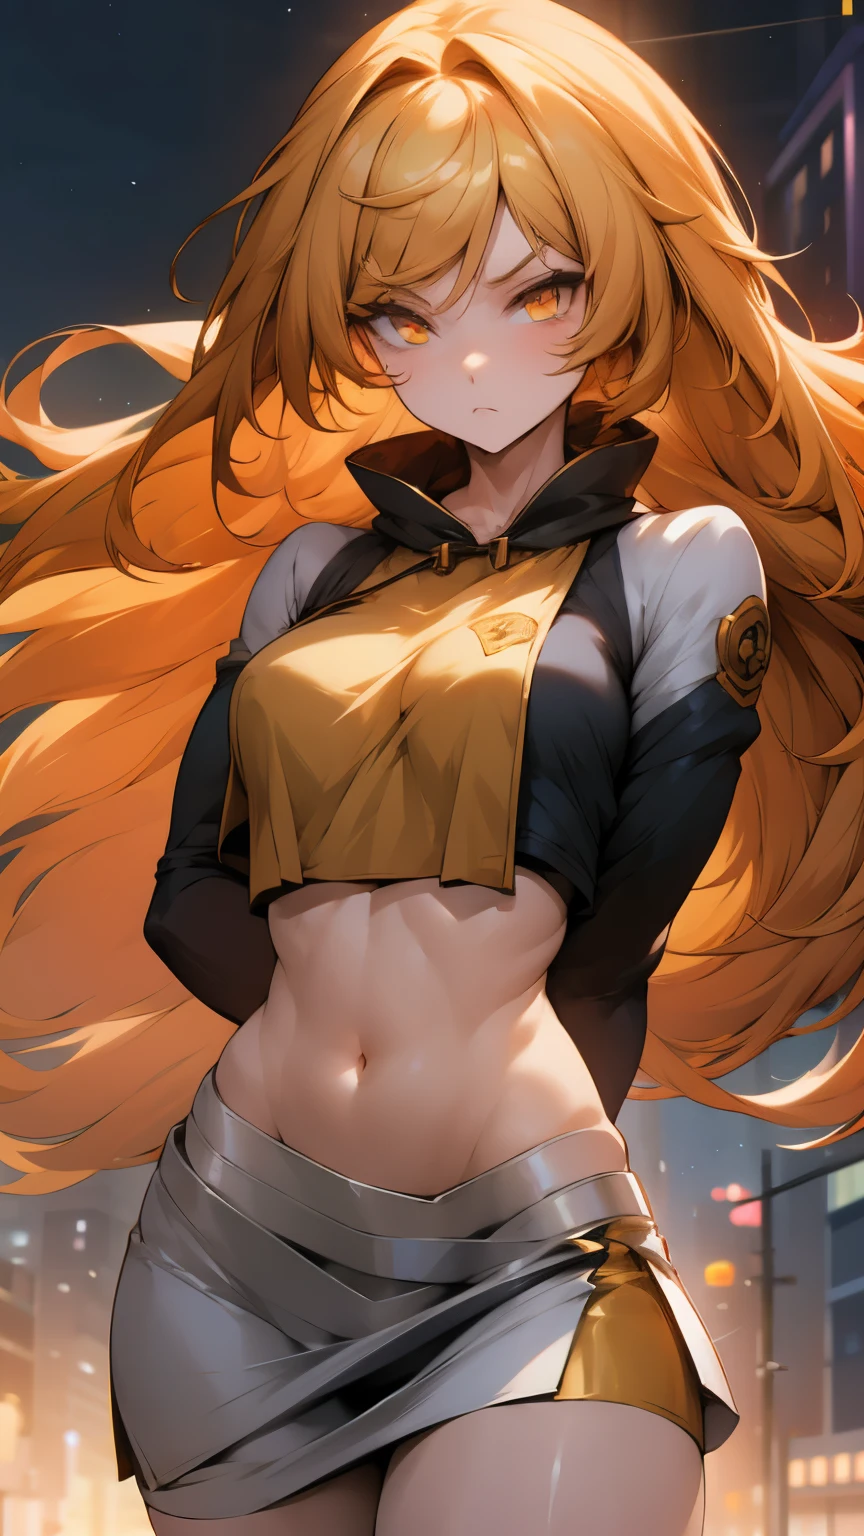 Anime girl, 1 anime girl, golden hair, golden eyes, golden pupils, glowing eyes, thick hair, blown by the wind, crop top, mini skirt, blush, sunlight, starlight, night, street city landscape, white skin, winter fashion outfit, beautiful, Sassy face, sassy pose